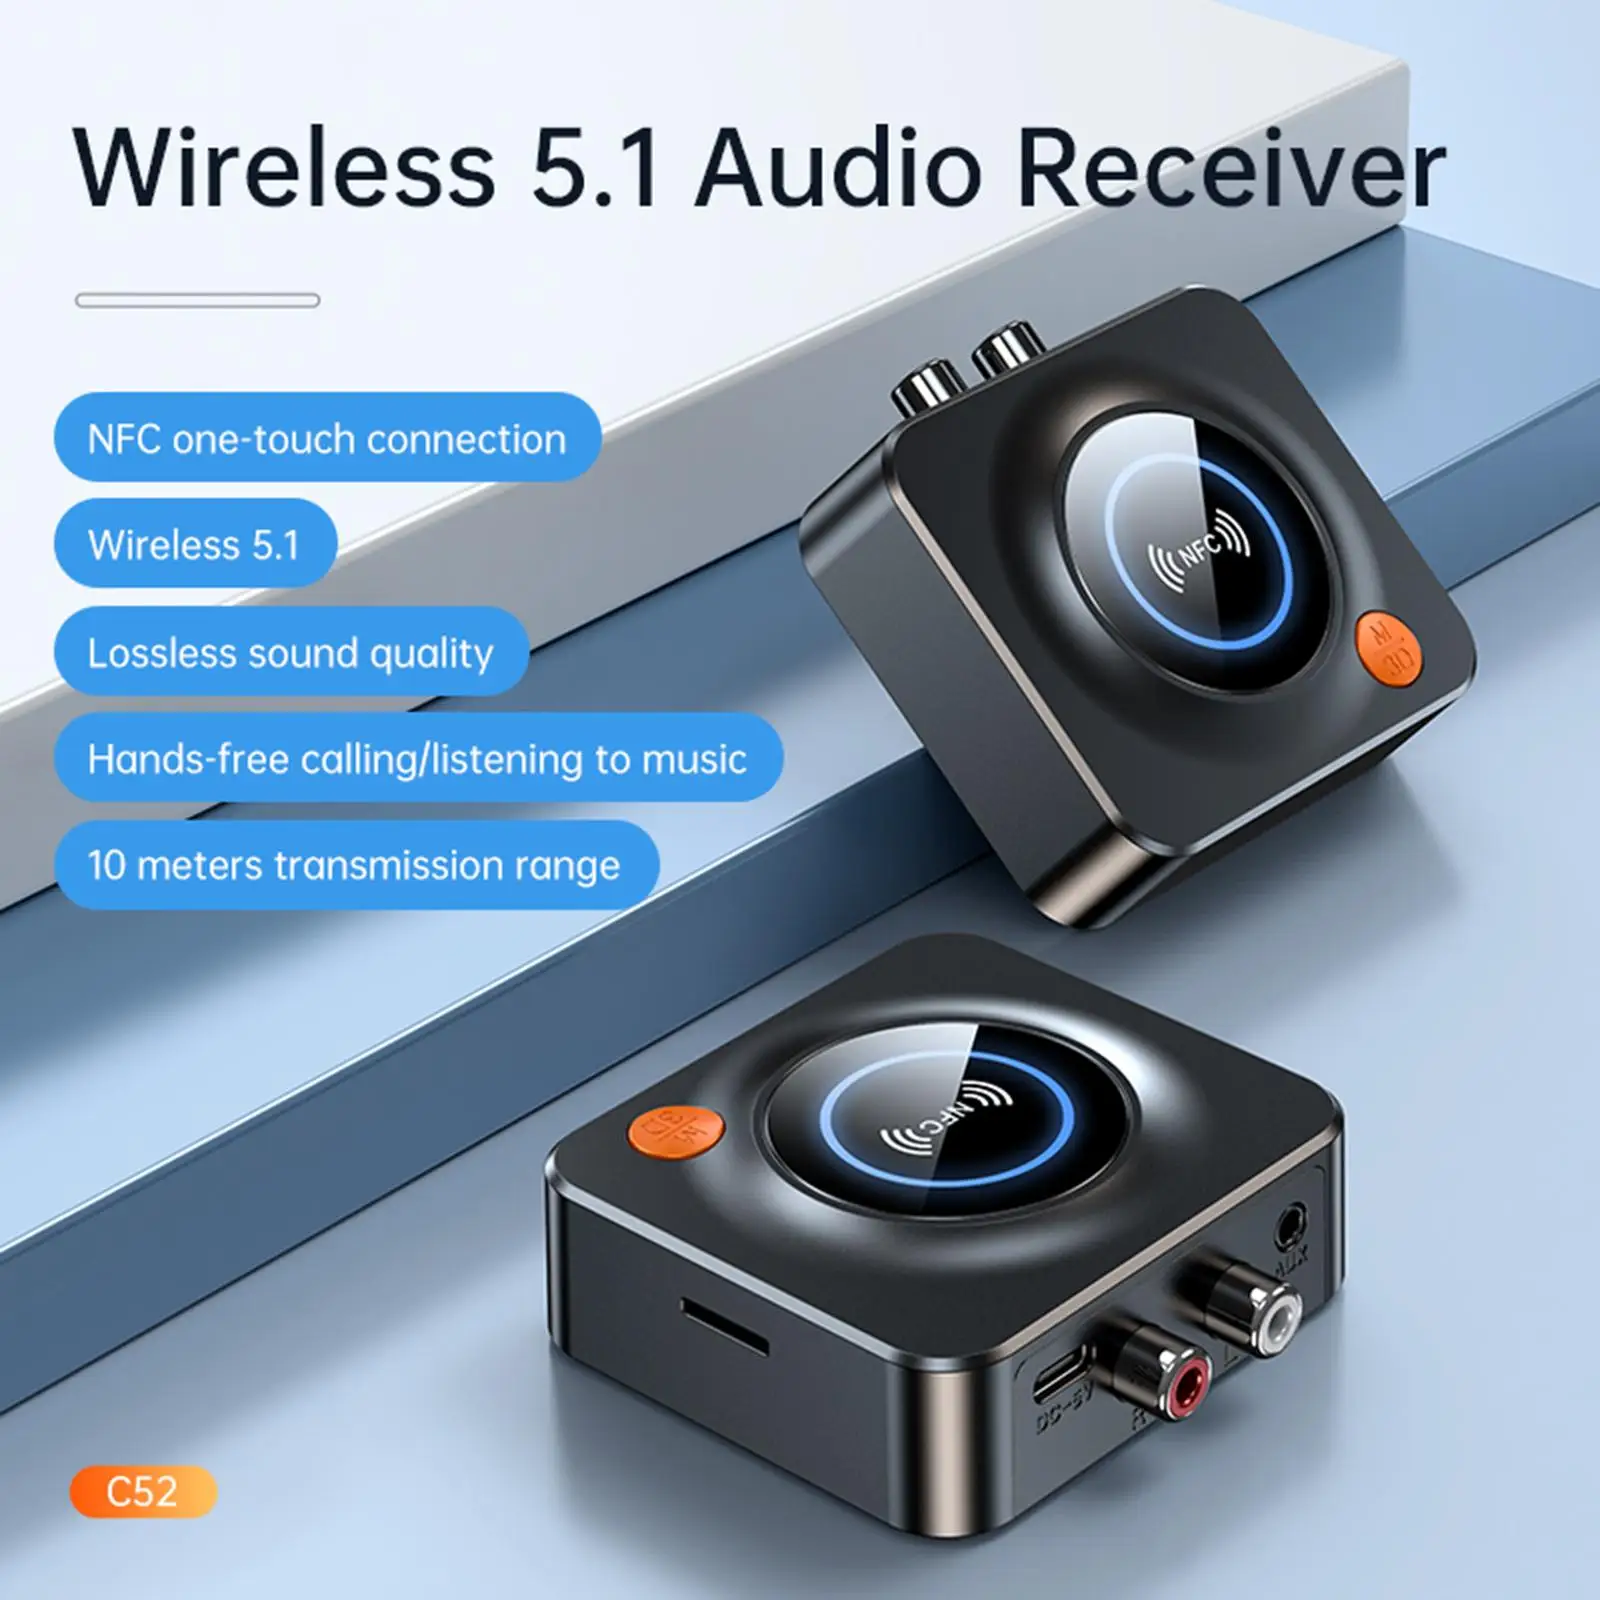 NFC Enabled Audio Receiver TF card with Smartphones and Wireless Audio Adapter for Streaming Car Stereo System Home Stereo